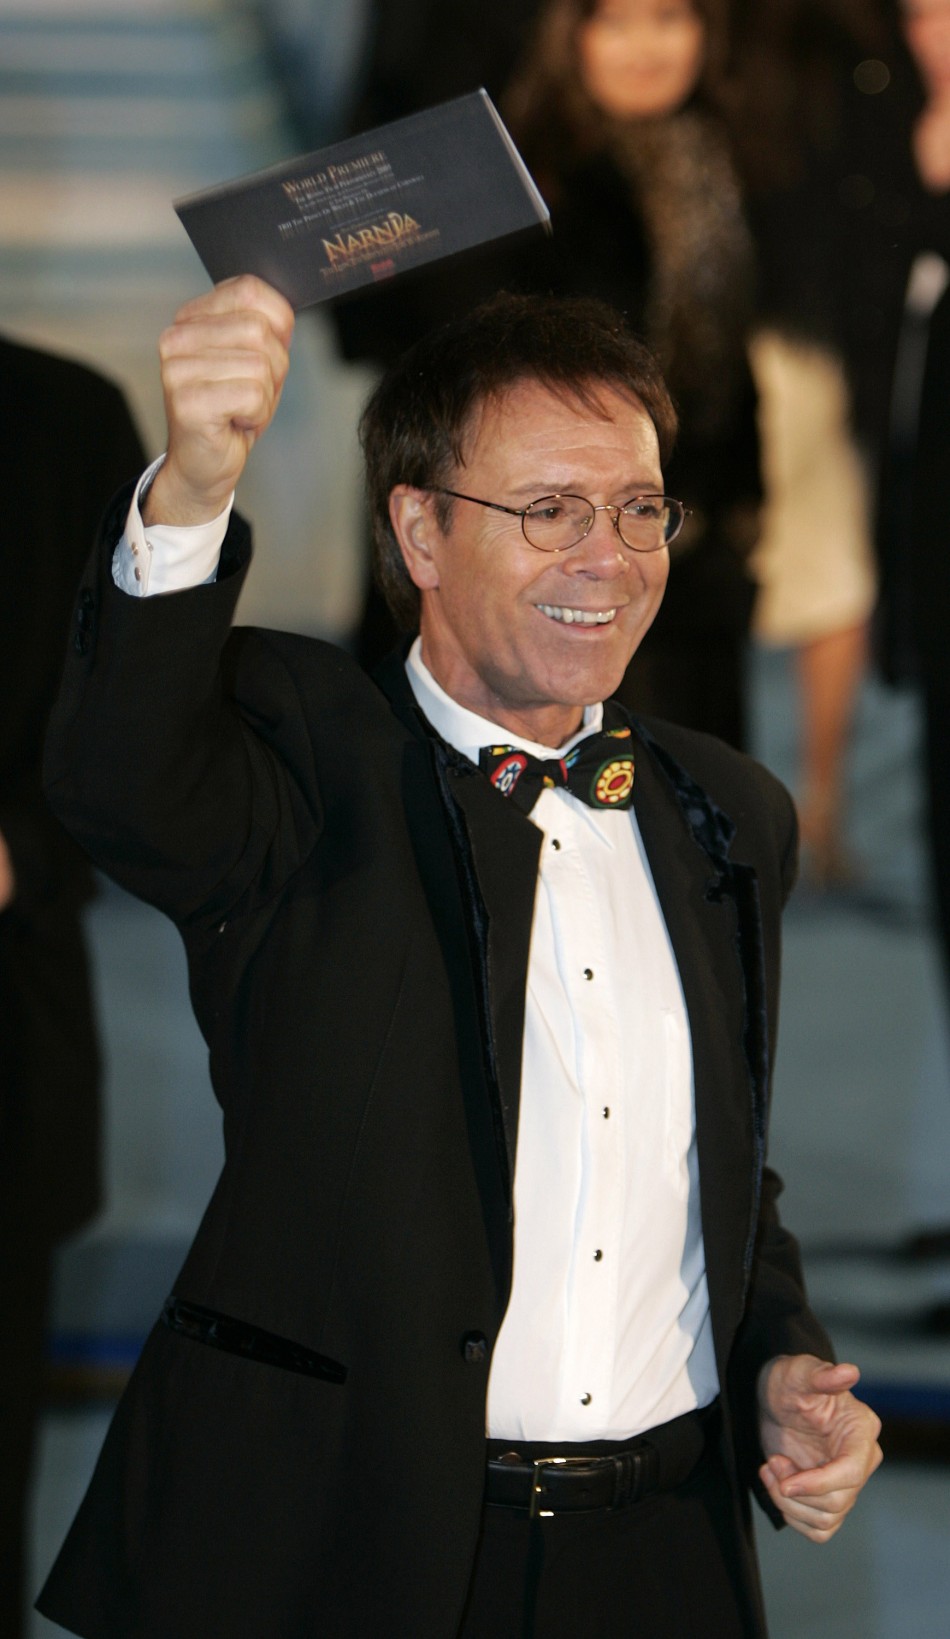 Veteran singer Sir Cliff Richard will sing with the Royal Air Force Squadronaires, one of the UKs finest big bands.